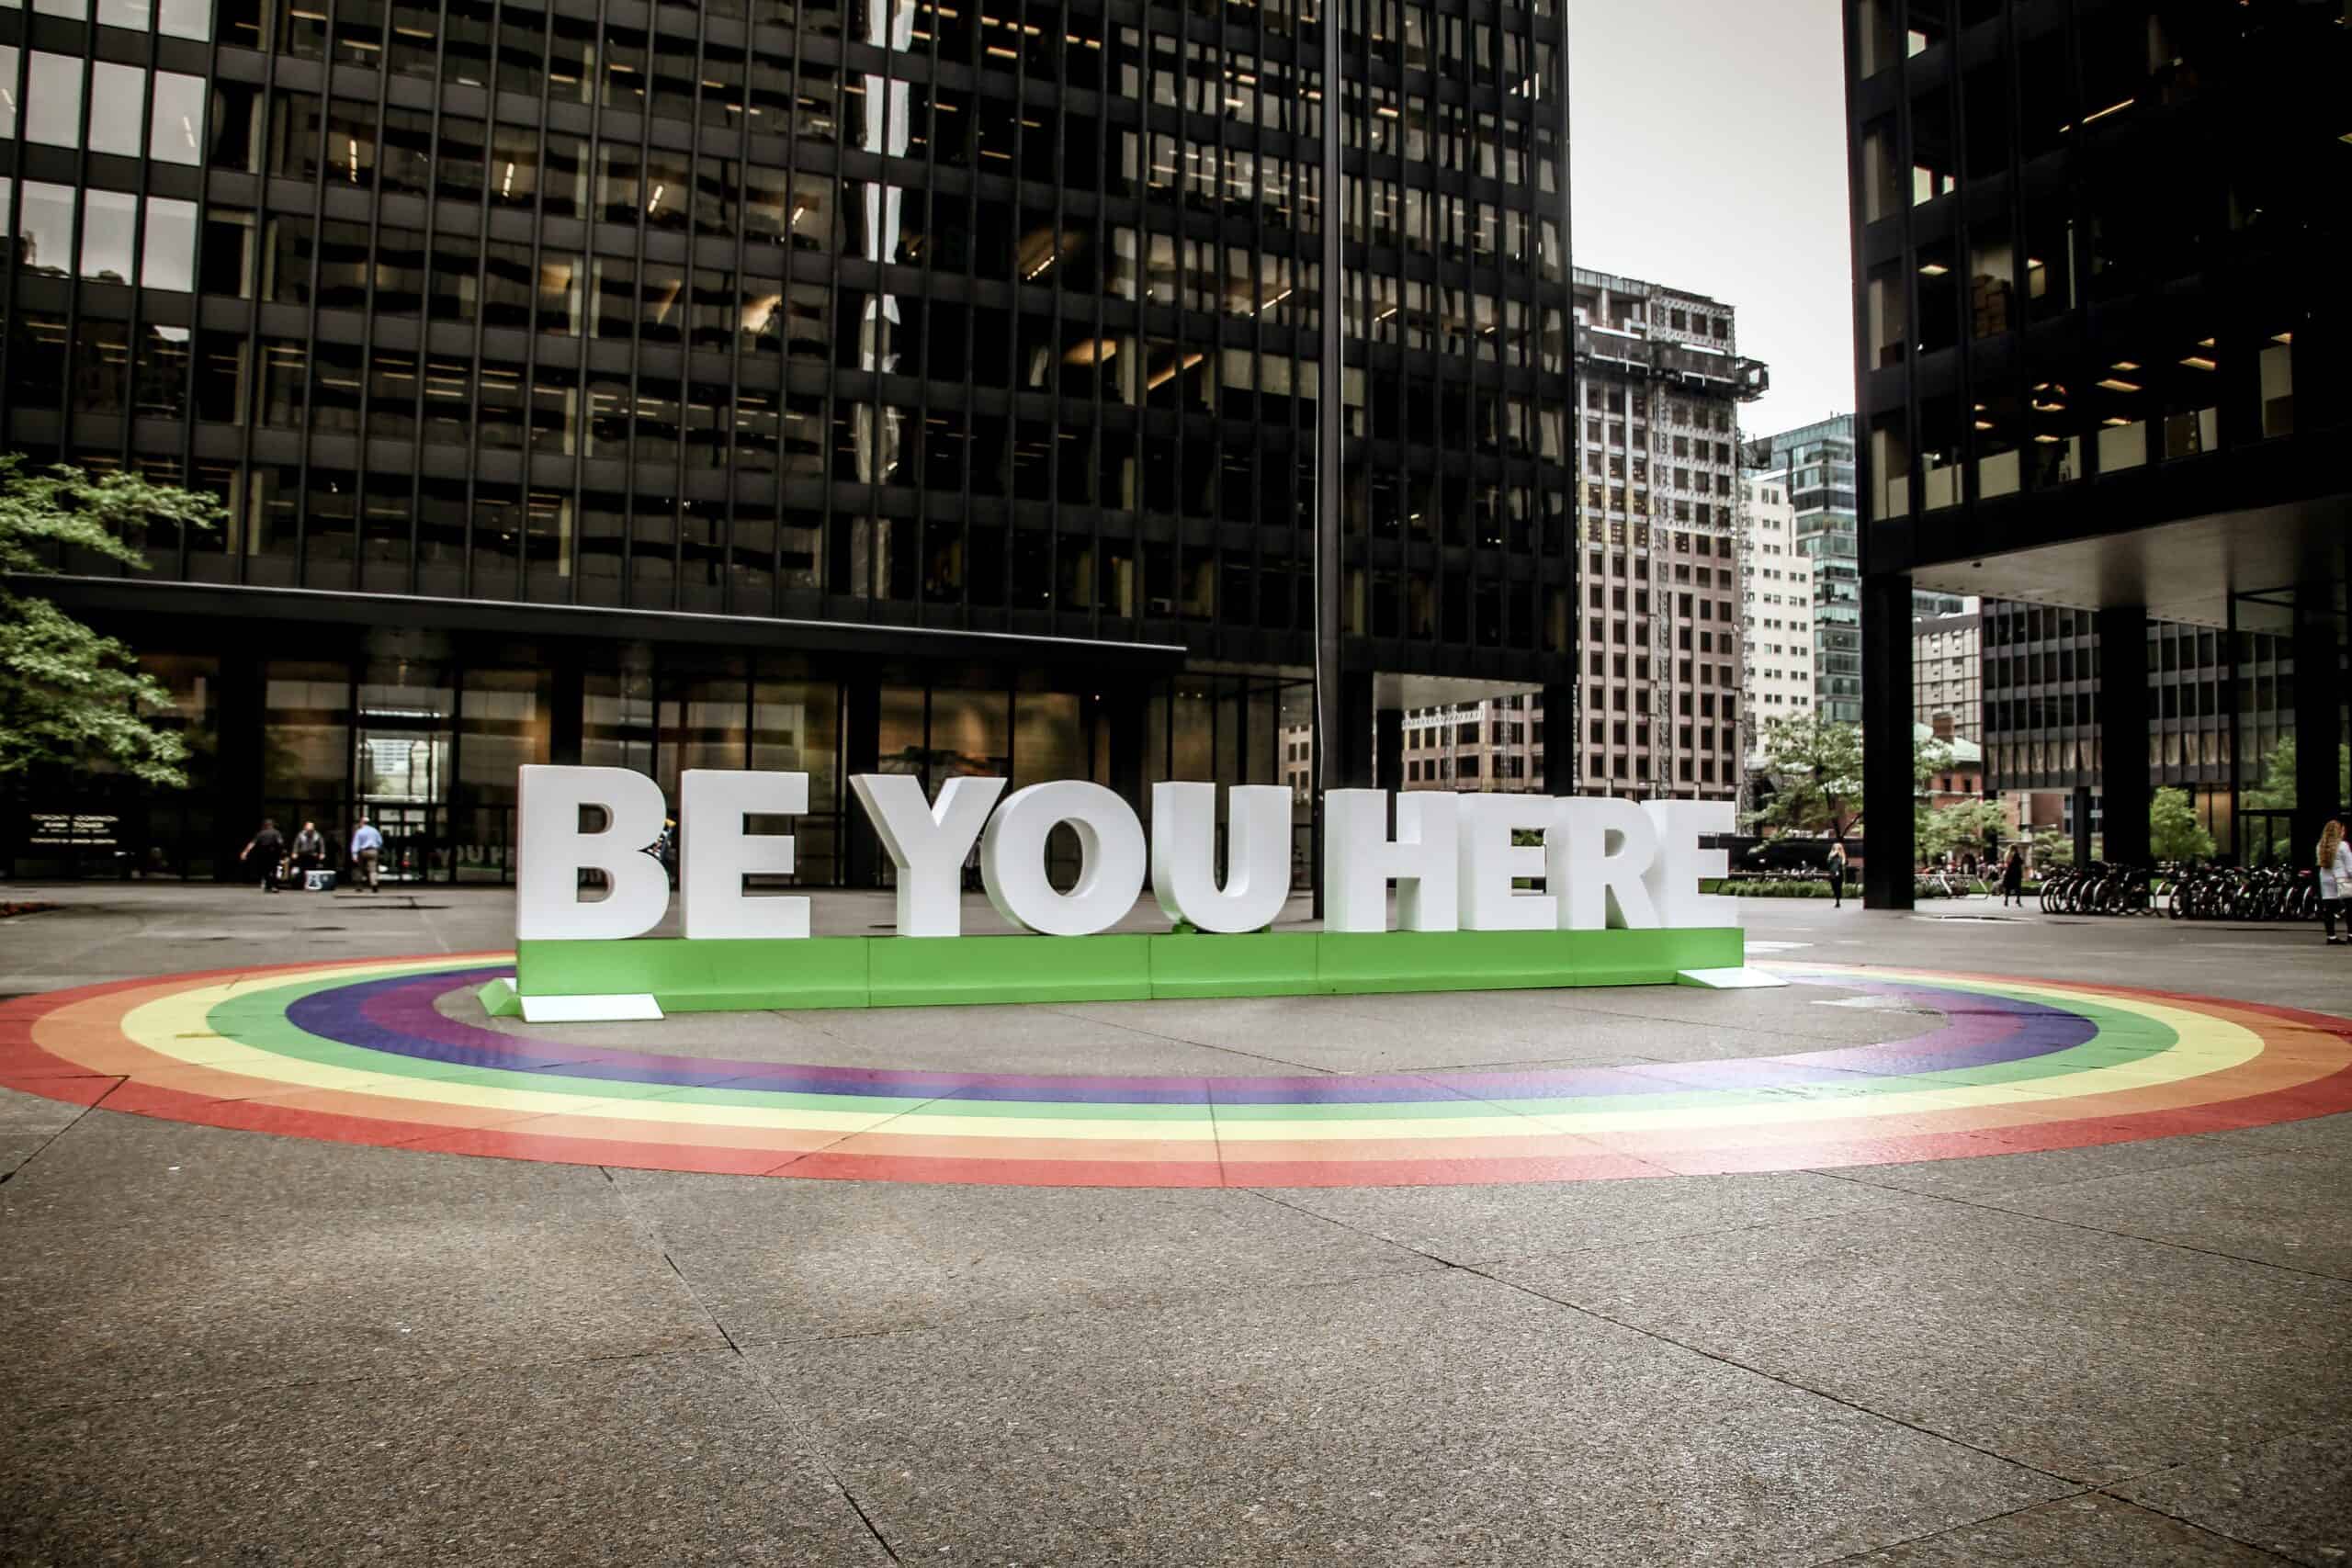 A statue in the middle of a square in Toronto, Canada that says "be you here"